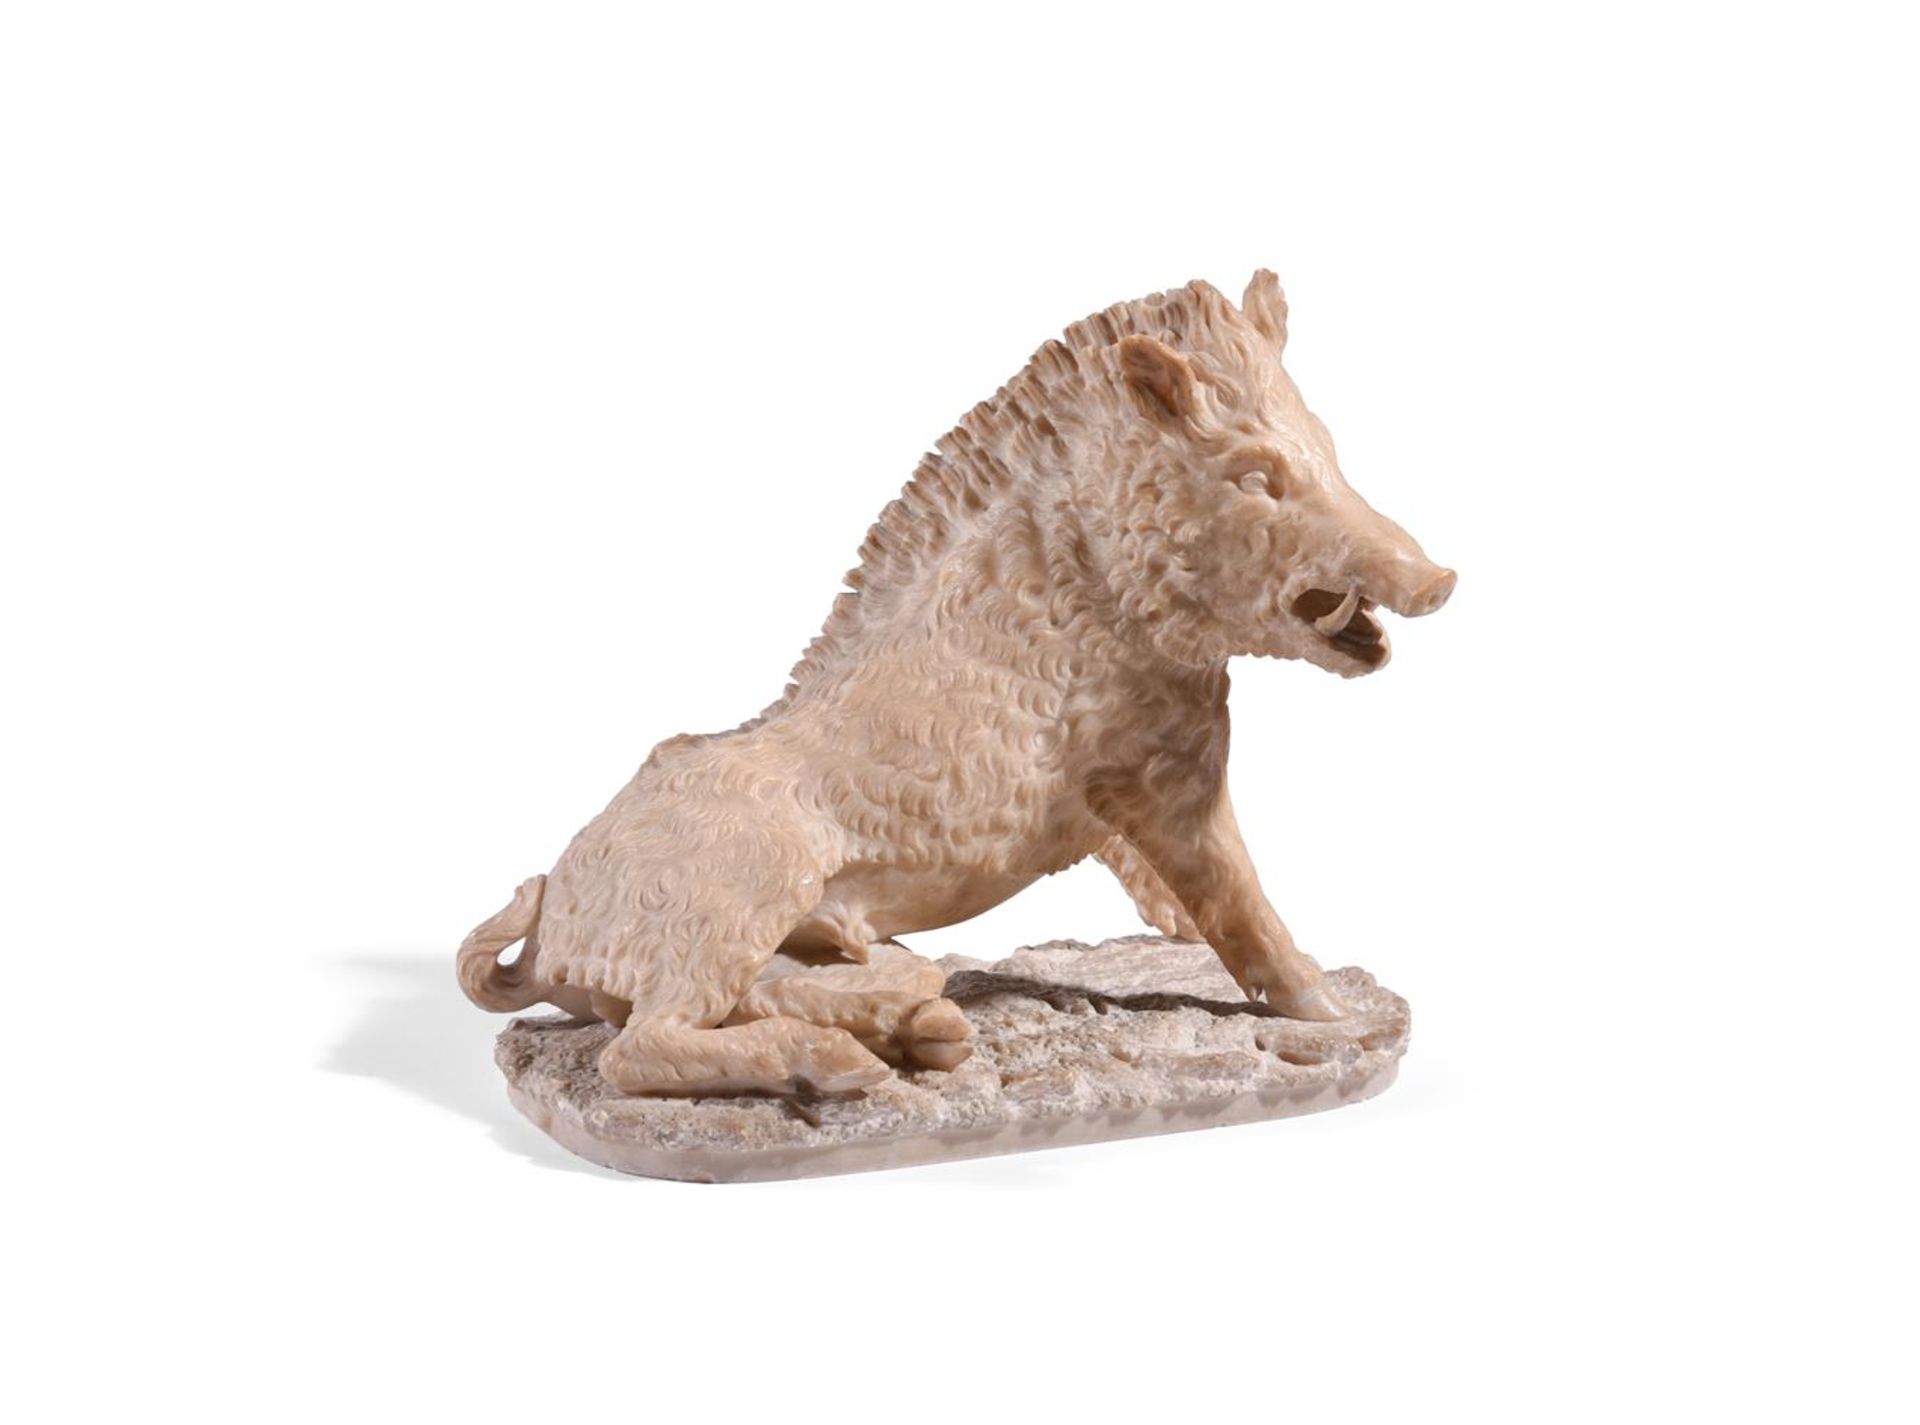 AFTER THE ANTIQUE- AN ITALIAN VOLTERRA ALABASTER FIGURE OF THE WILD BOAR (IL PORCELLINO), CIRCA 1800